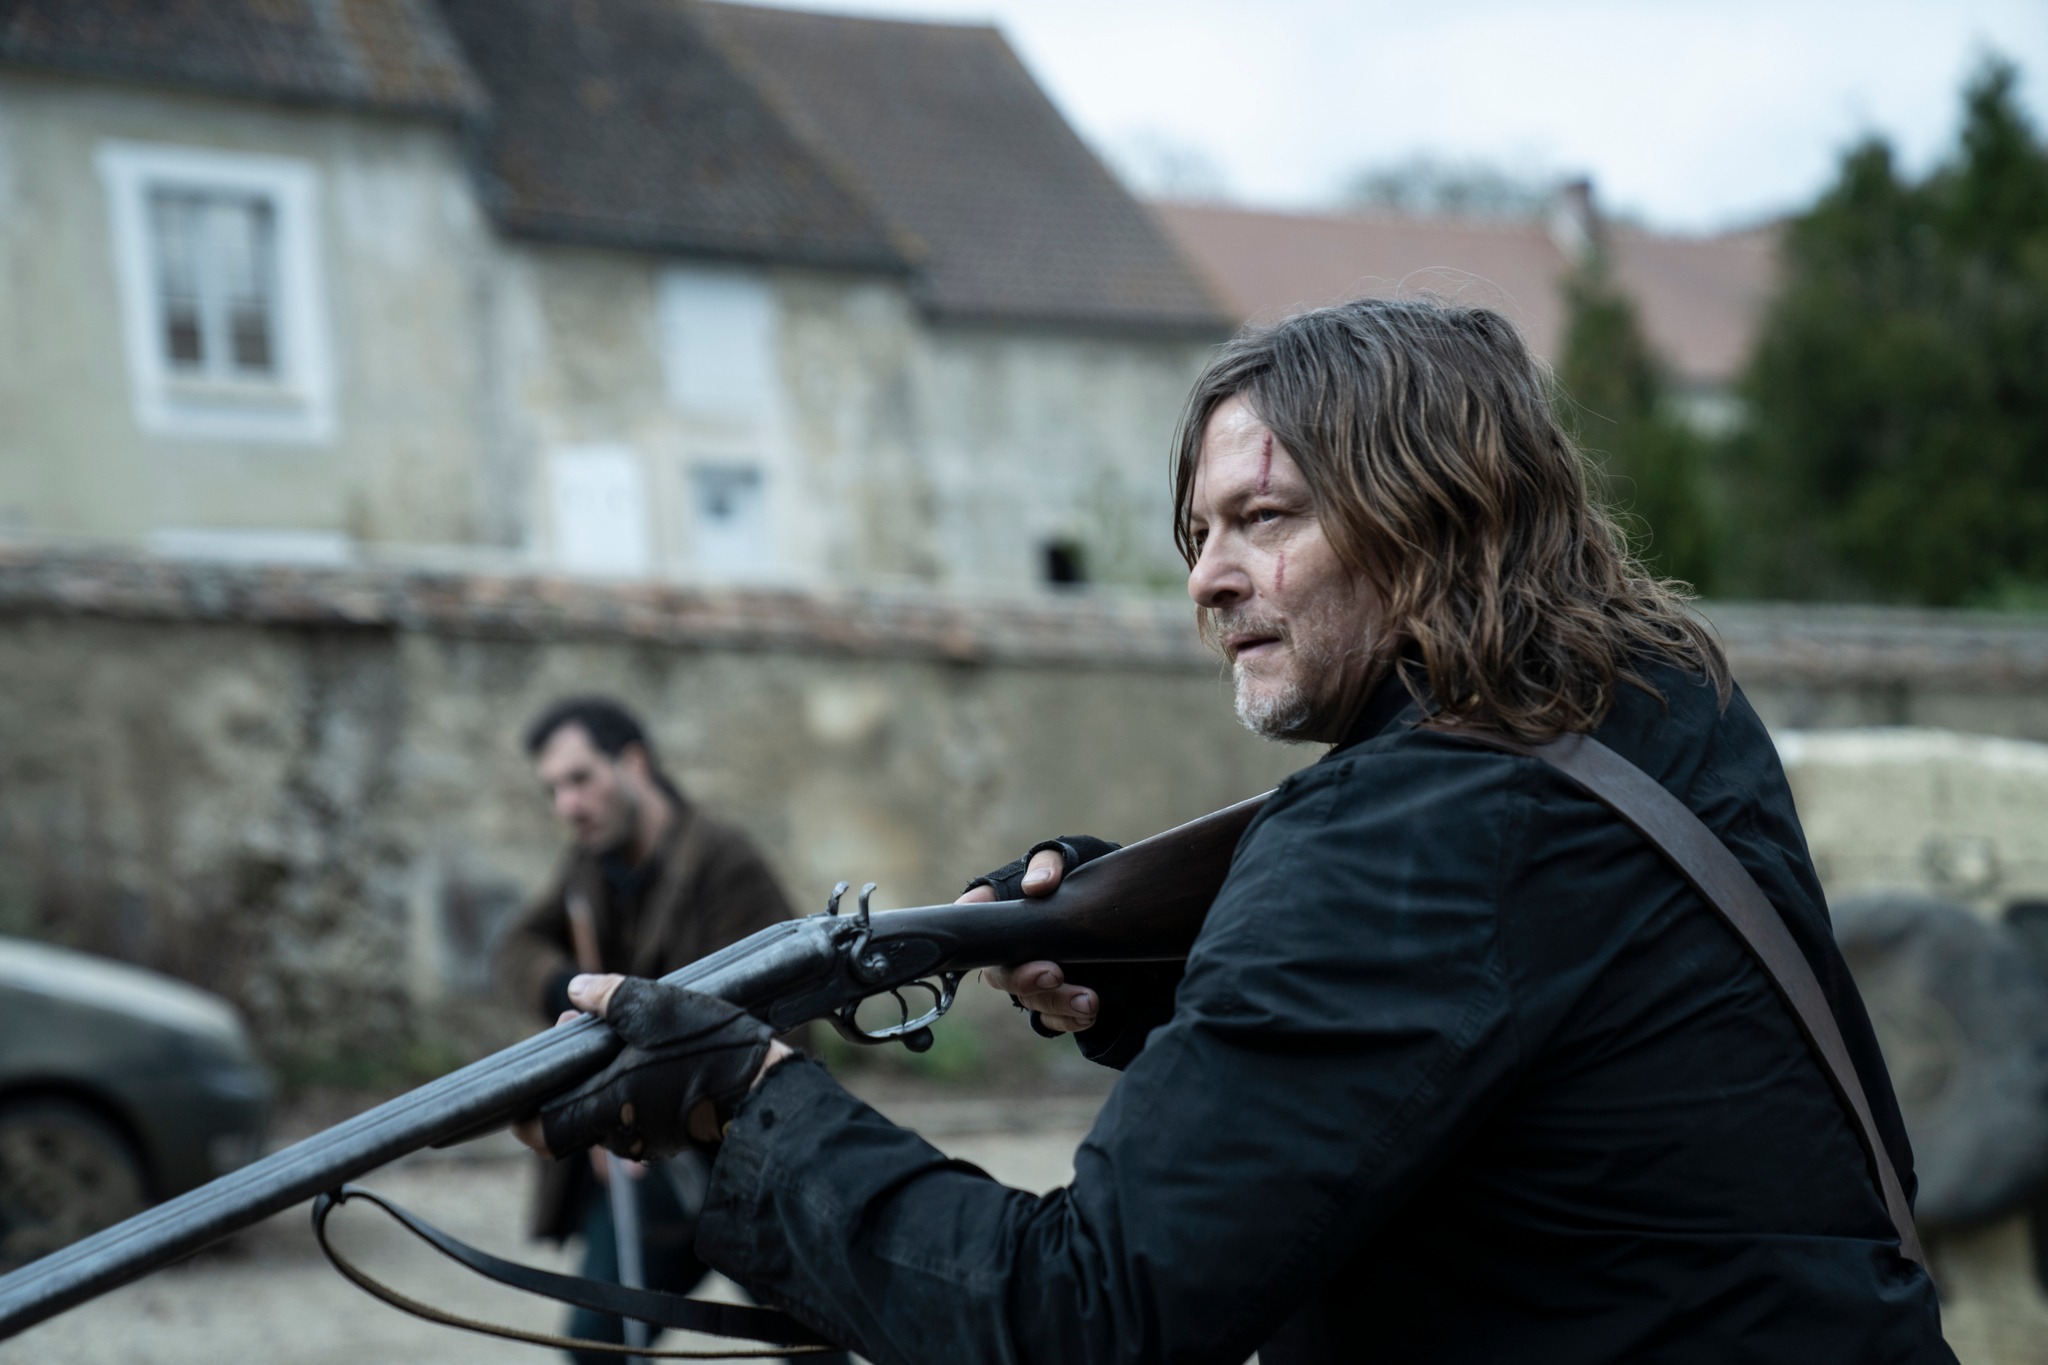 #The Walking Dead: Daryl Dixon: Season Two Photos and Premiere Date Released by AMC